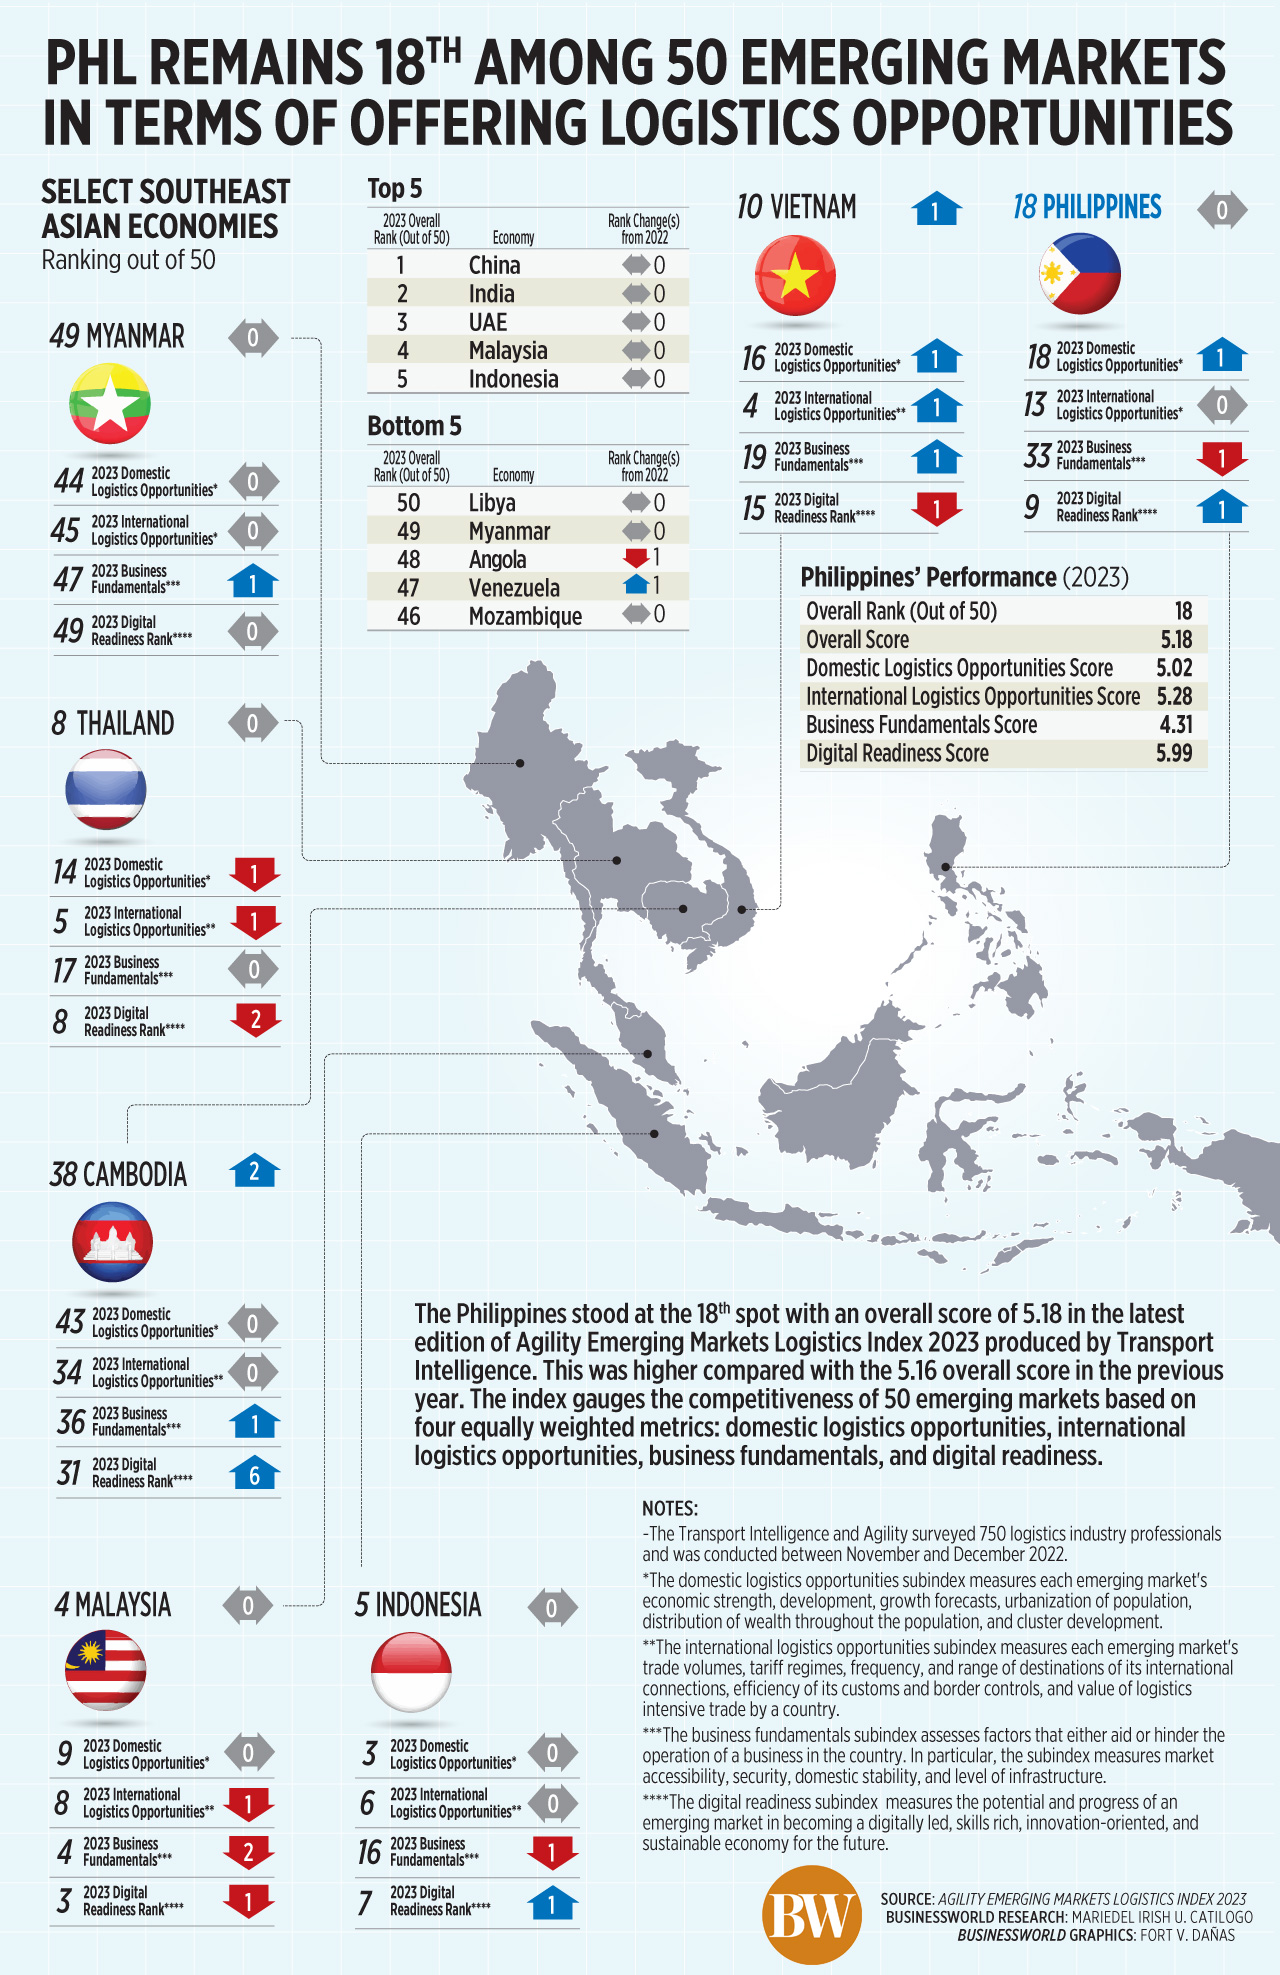 PHL remains 18<sup>th</sup> among 50 emerging markets in terms of offering logistics opportunities